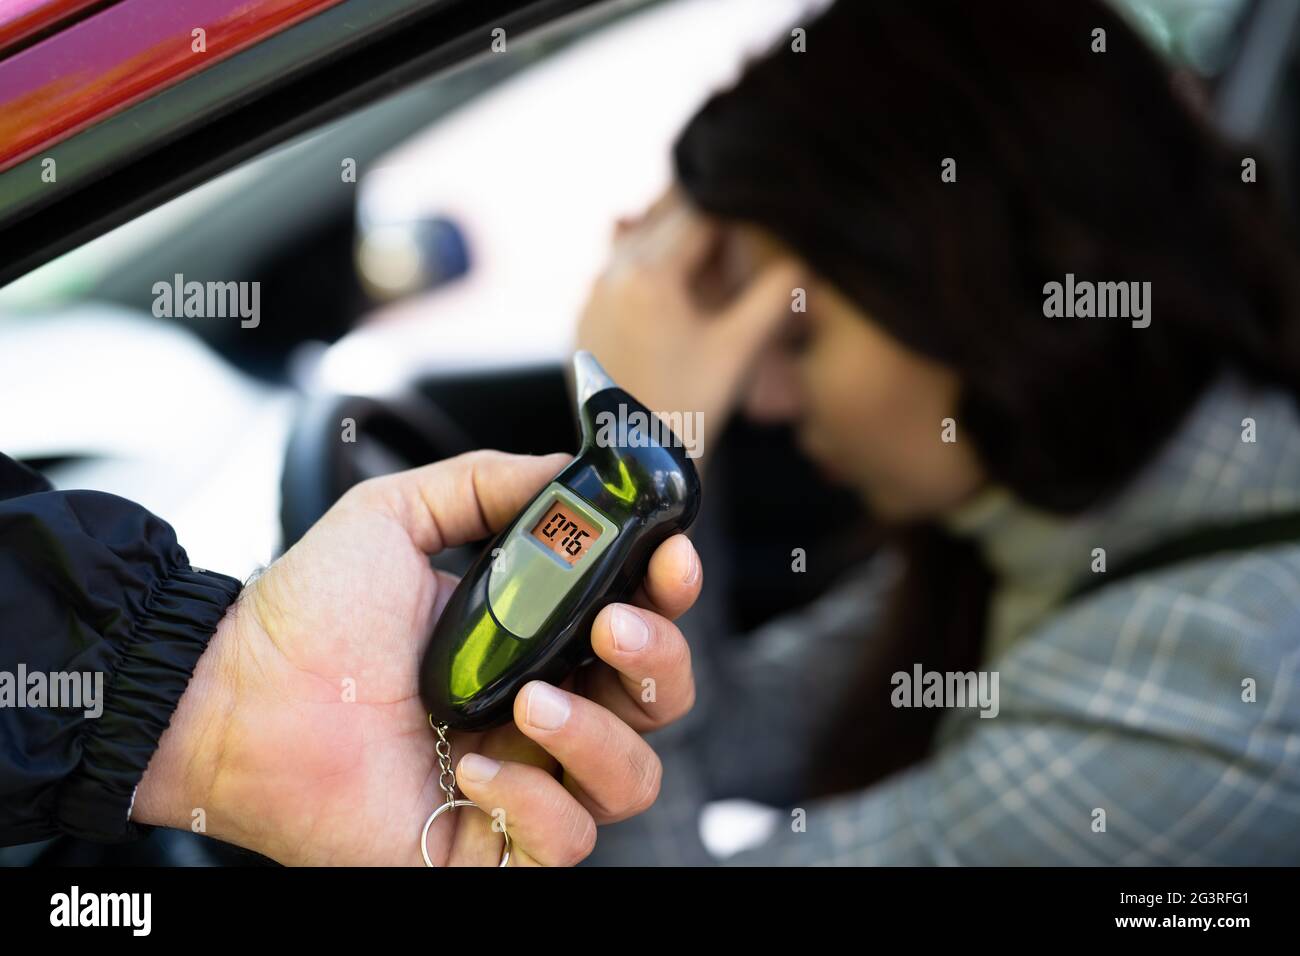 Sad Woman With Alcohol Intoxication Stopped By Policeman Stock Photo